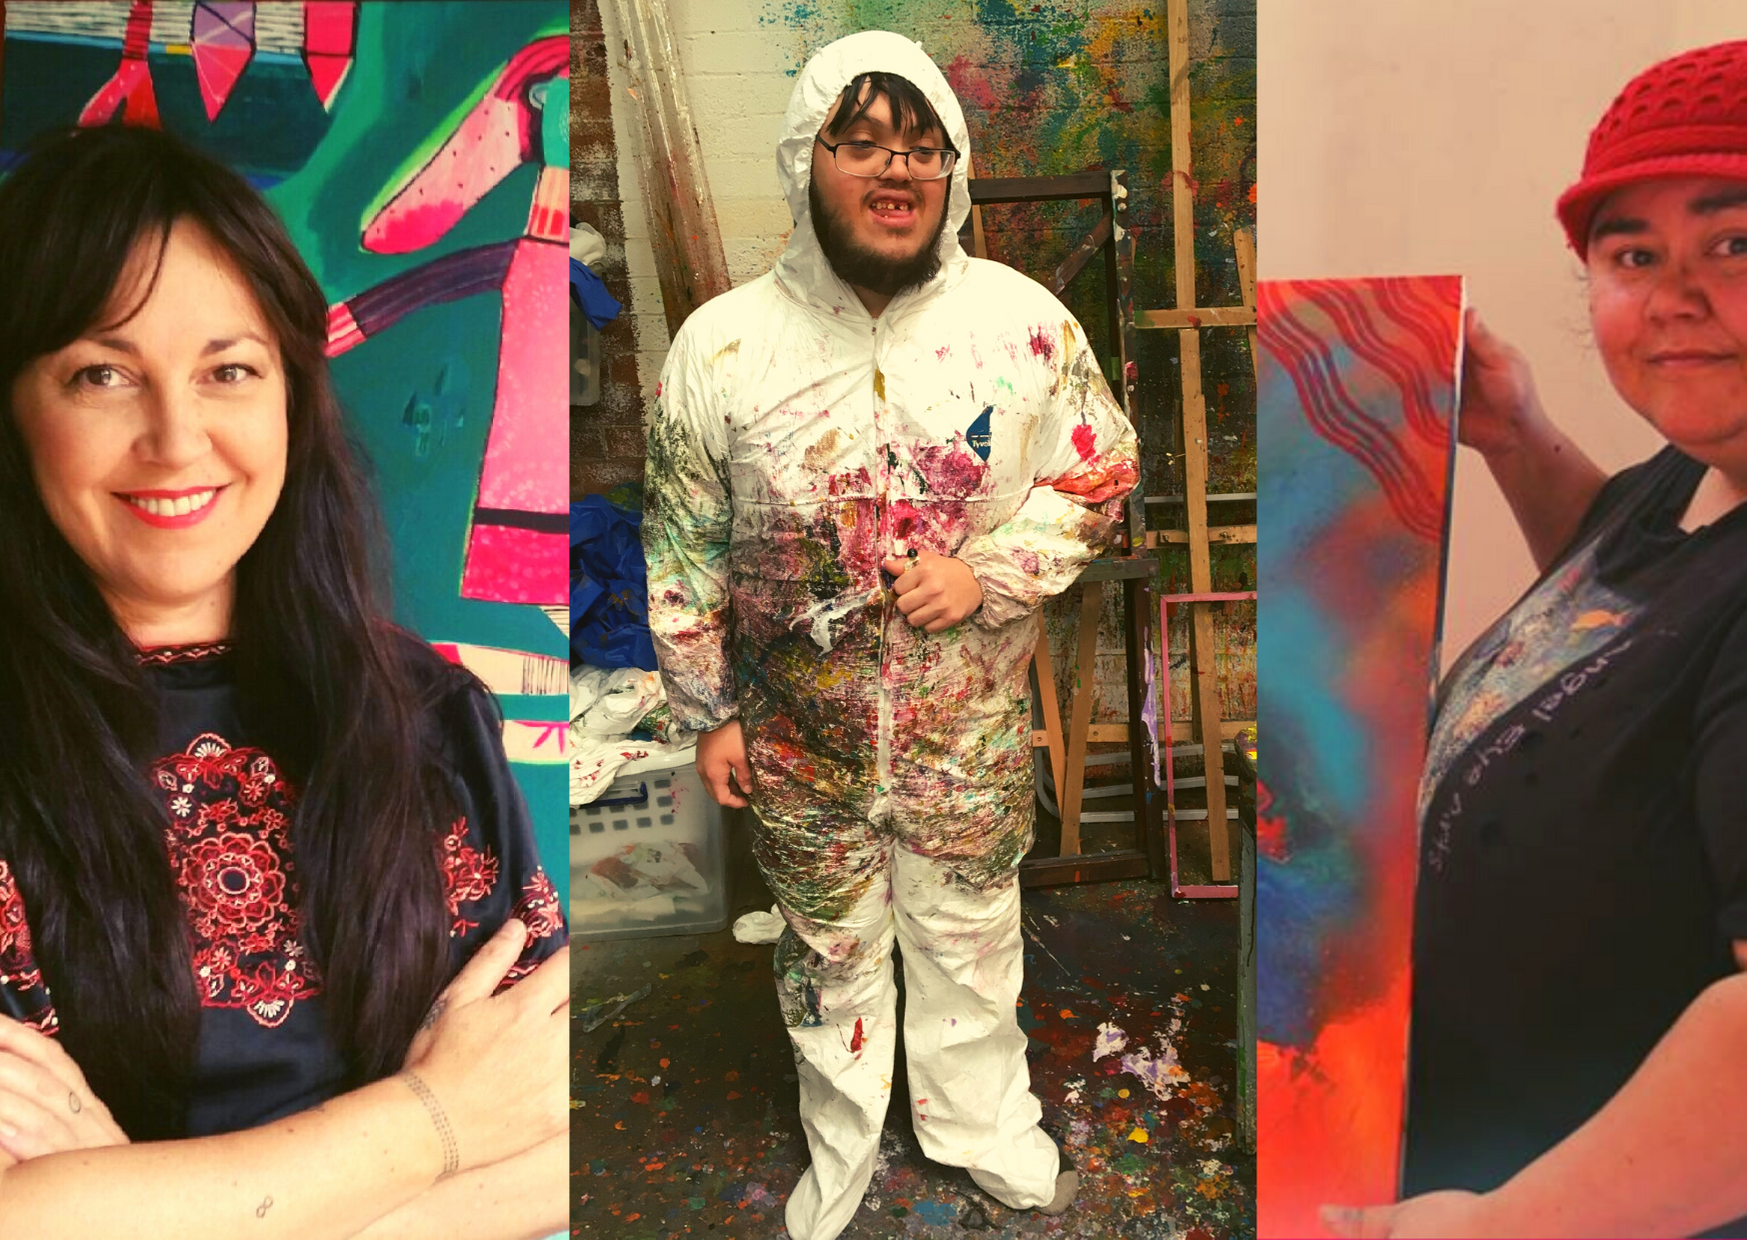 A composite image of three visual artists. On the left is a women with long dark hair next to a colourful painting. In the middle is a young man in a paint splattered white plastic hooded jumpsuit. On the right is a woman in a red hat with colourful painting.